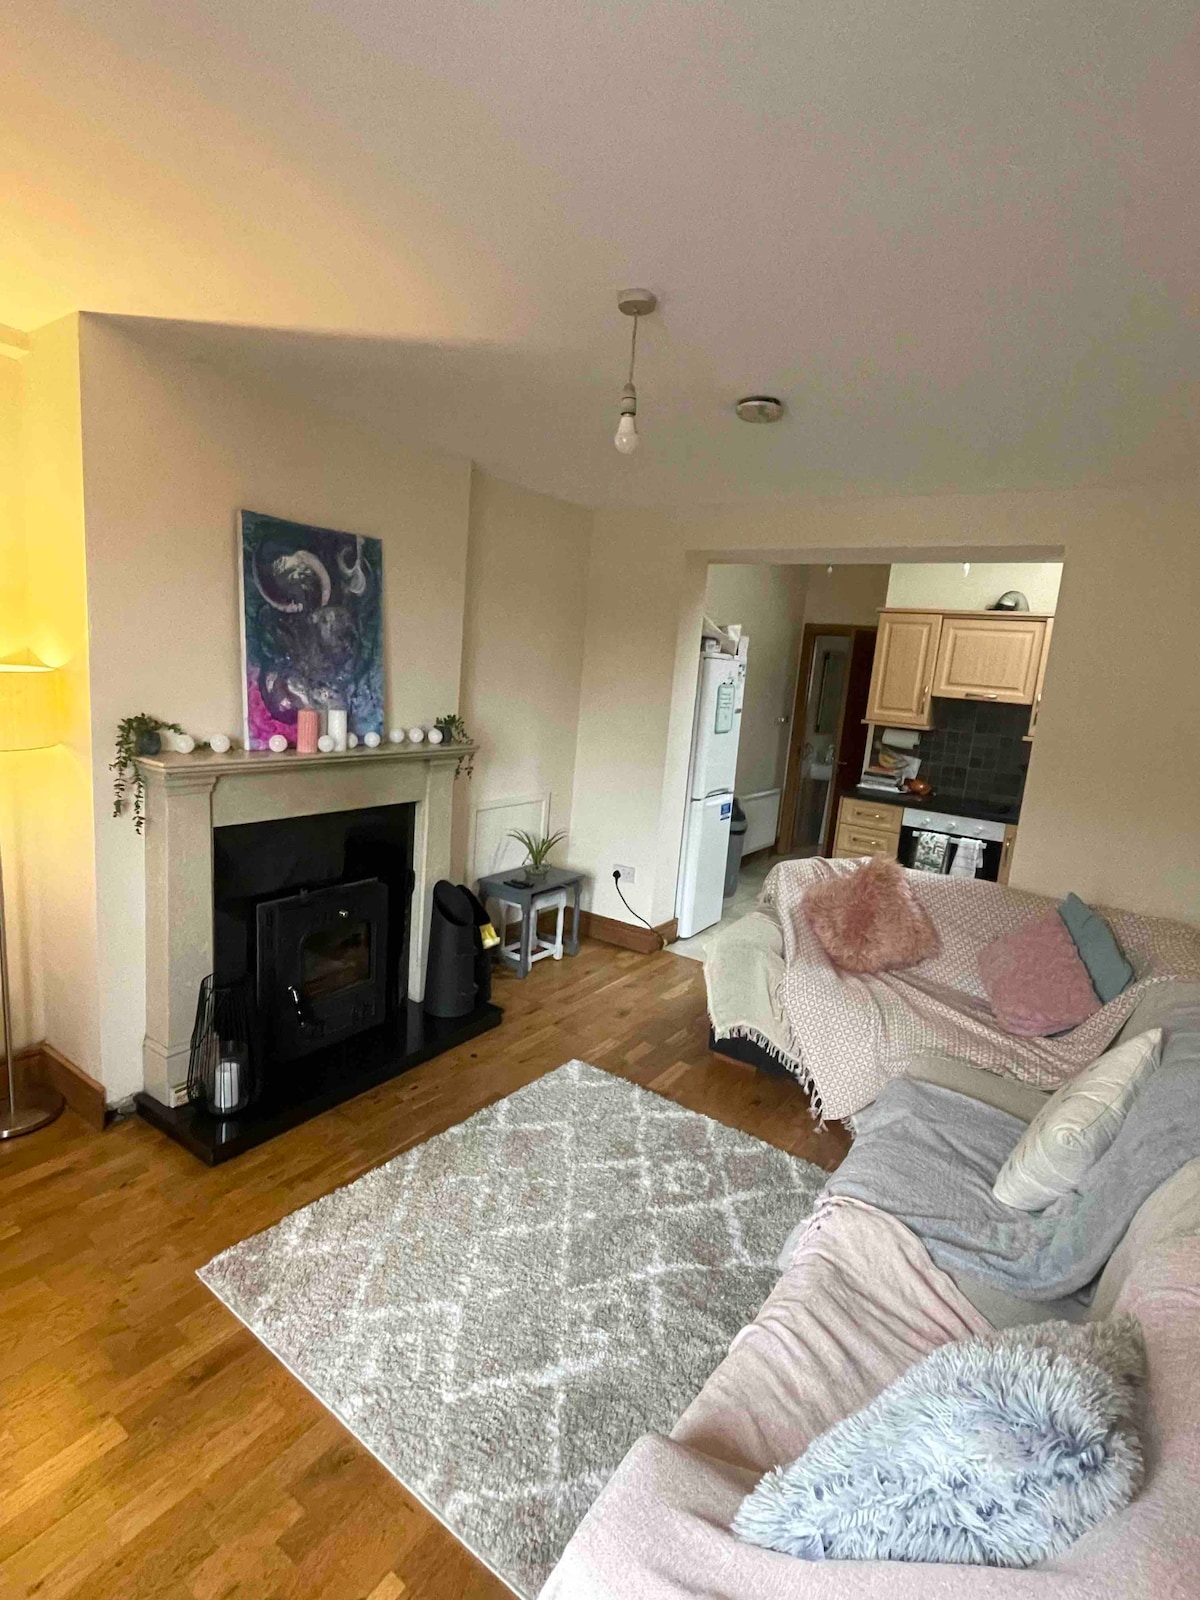 1 bedroom house In town centre